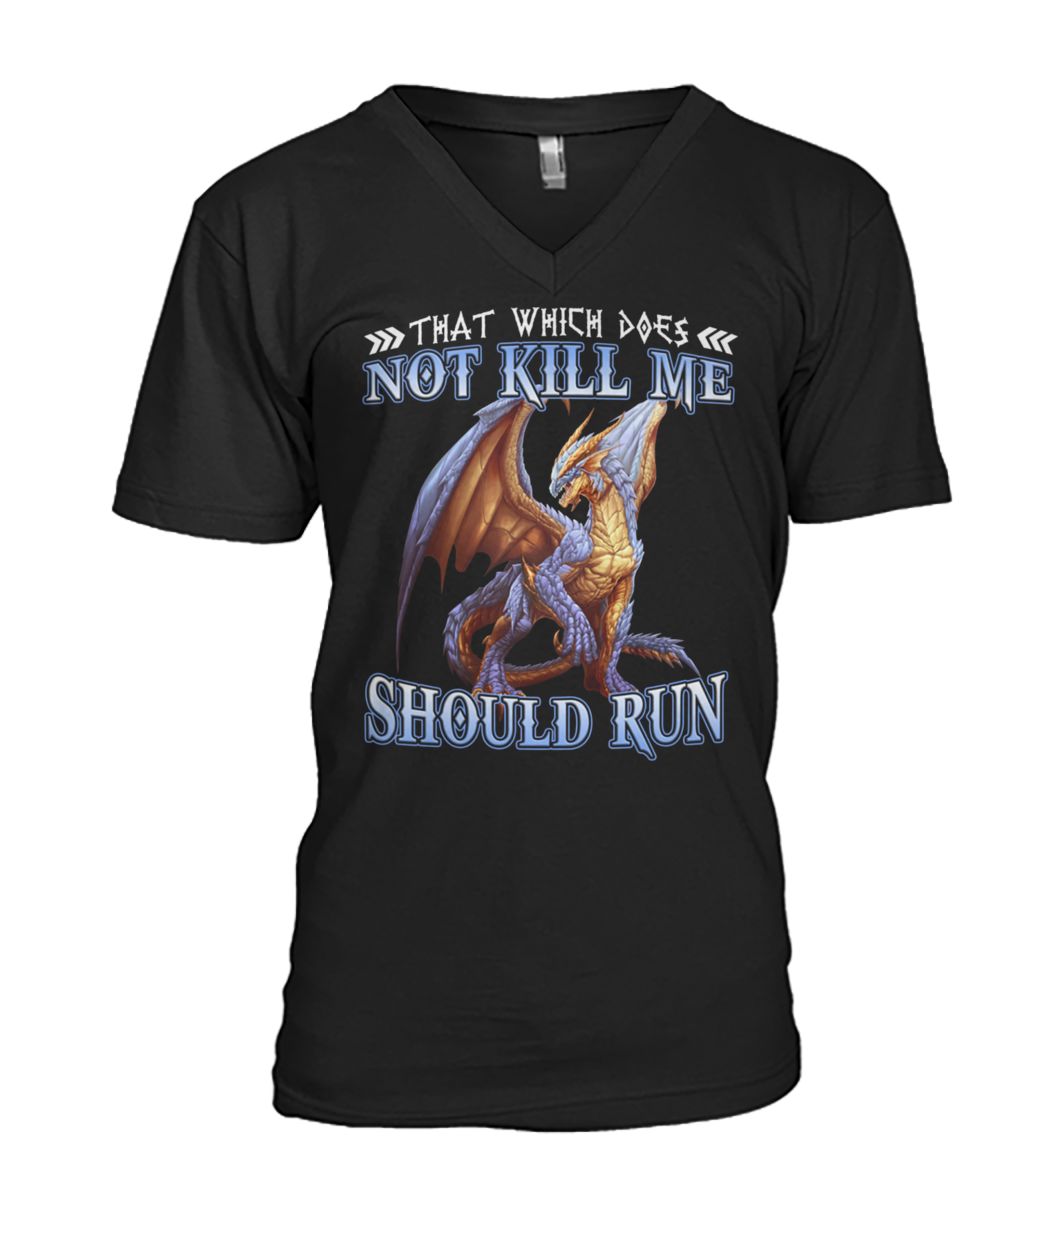 That which does not kill me should run dragon mens v-neck